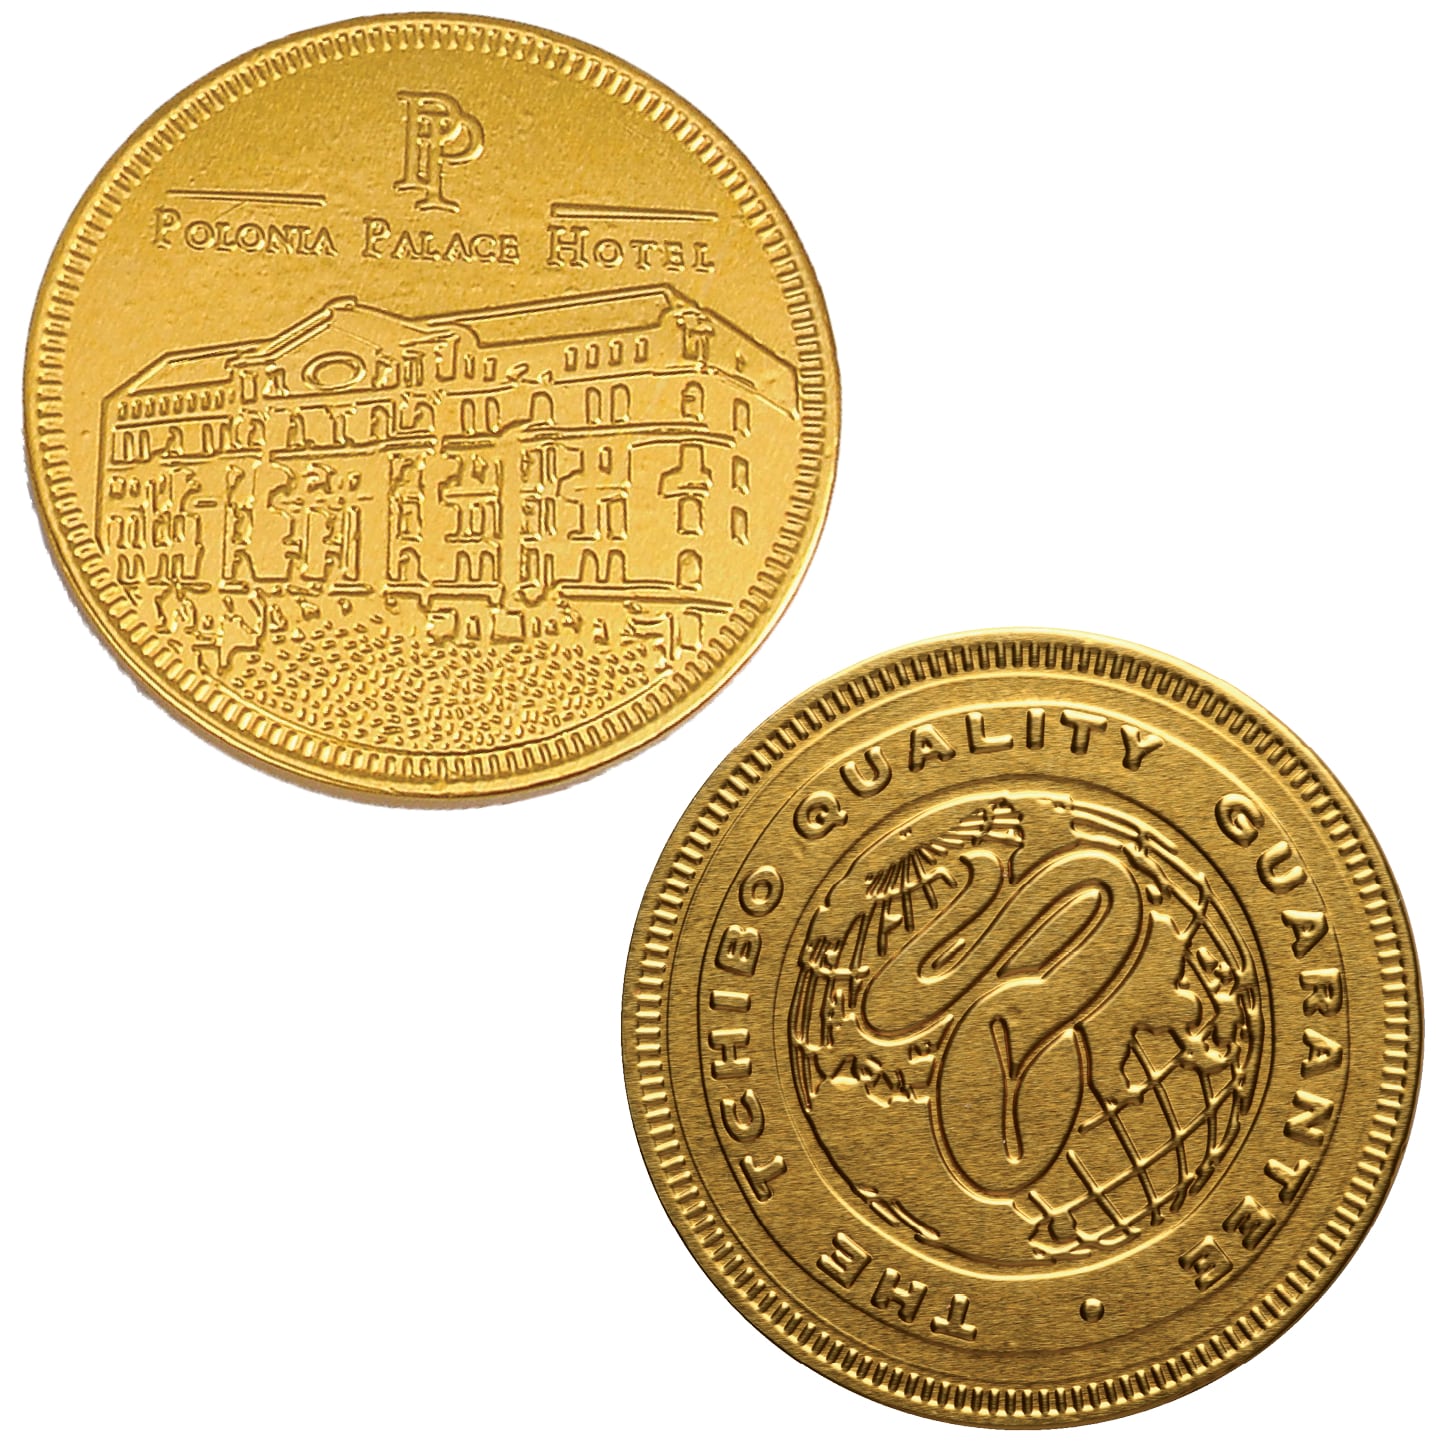 CHOCOLATE COINS